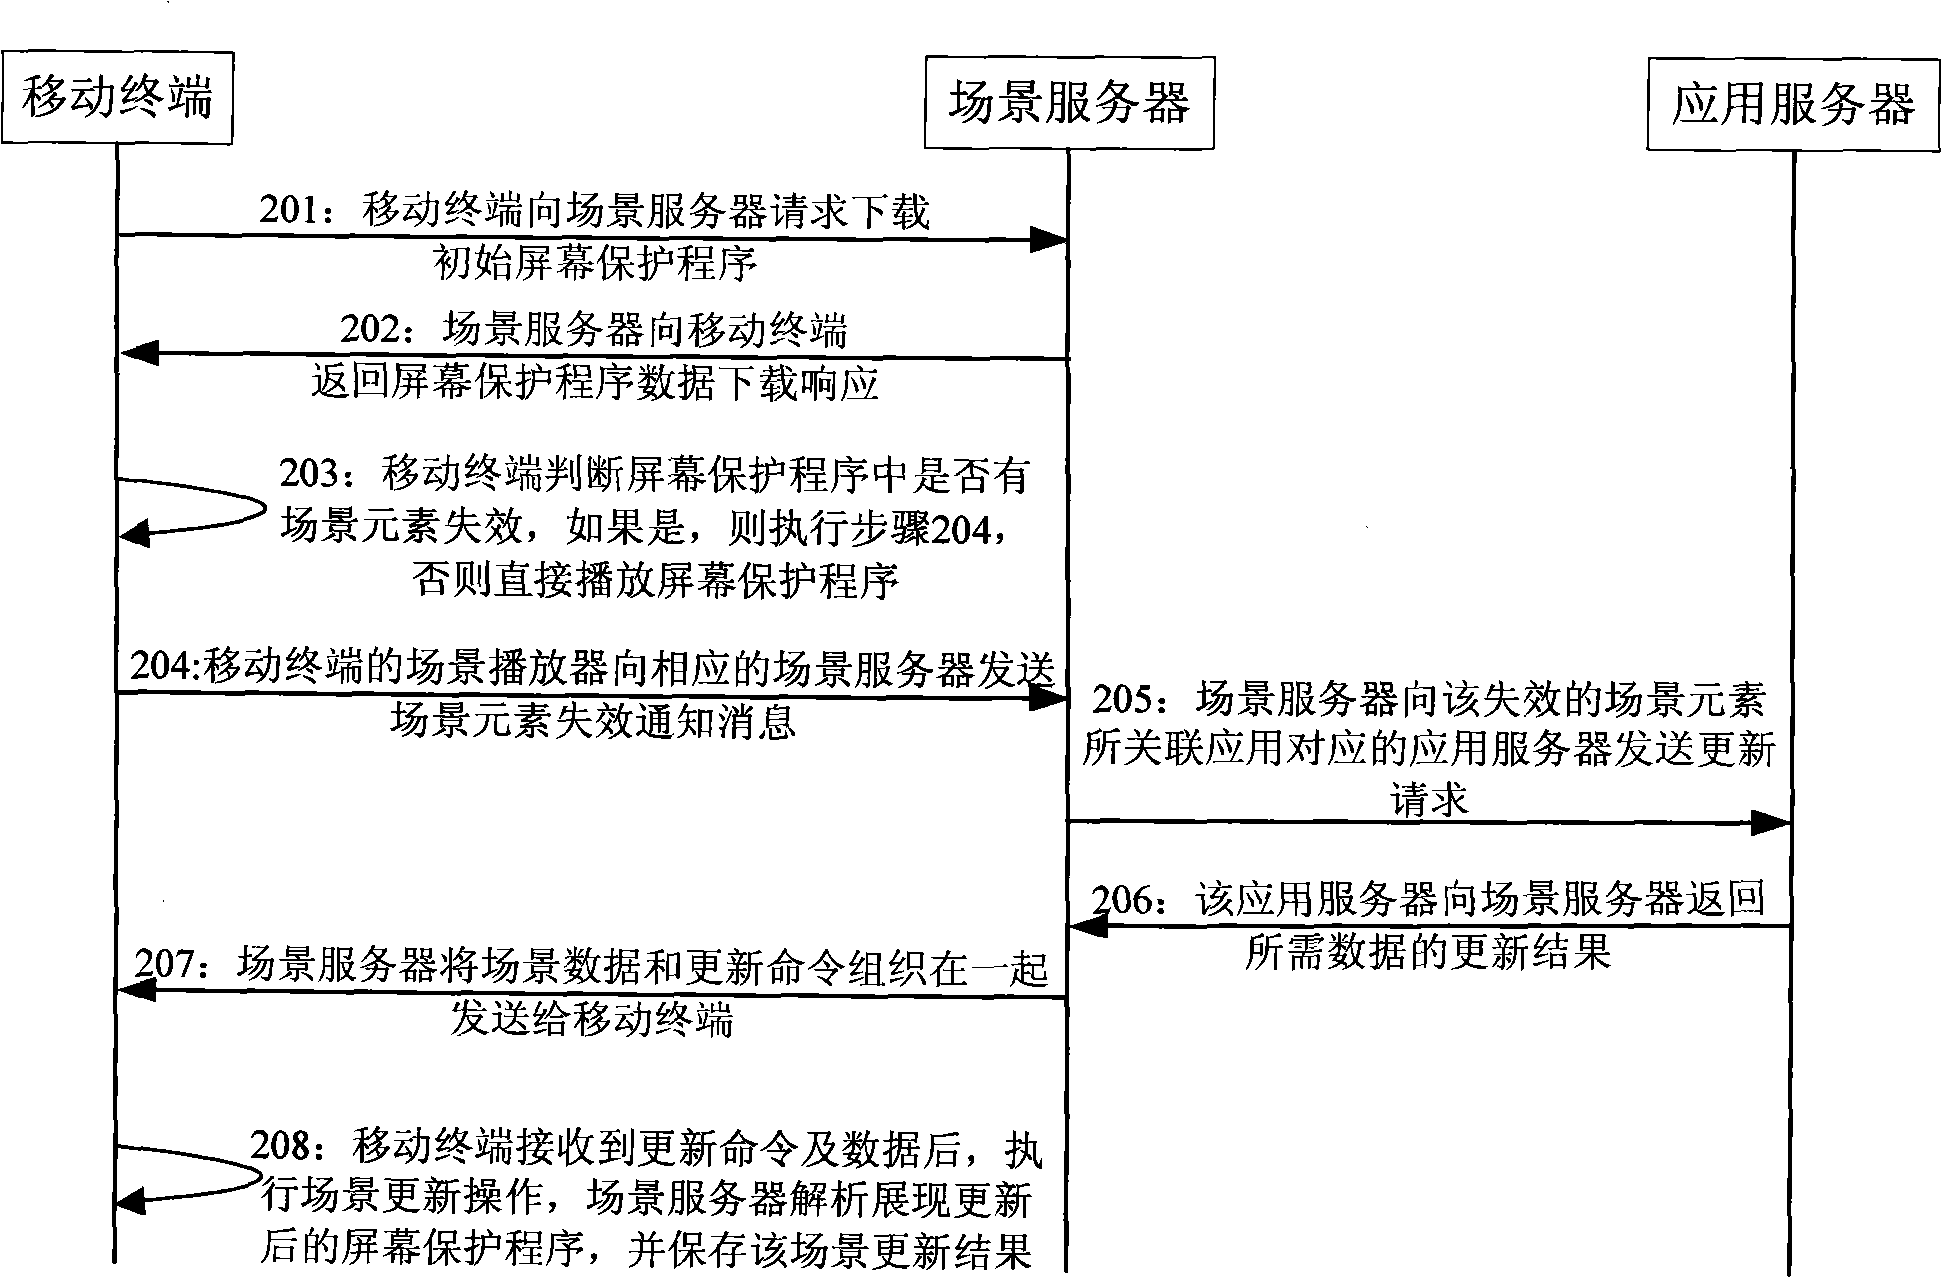 Method and system for dynamically updating screen saver